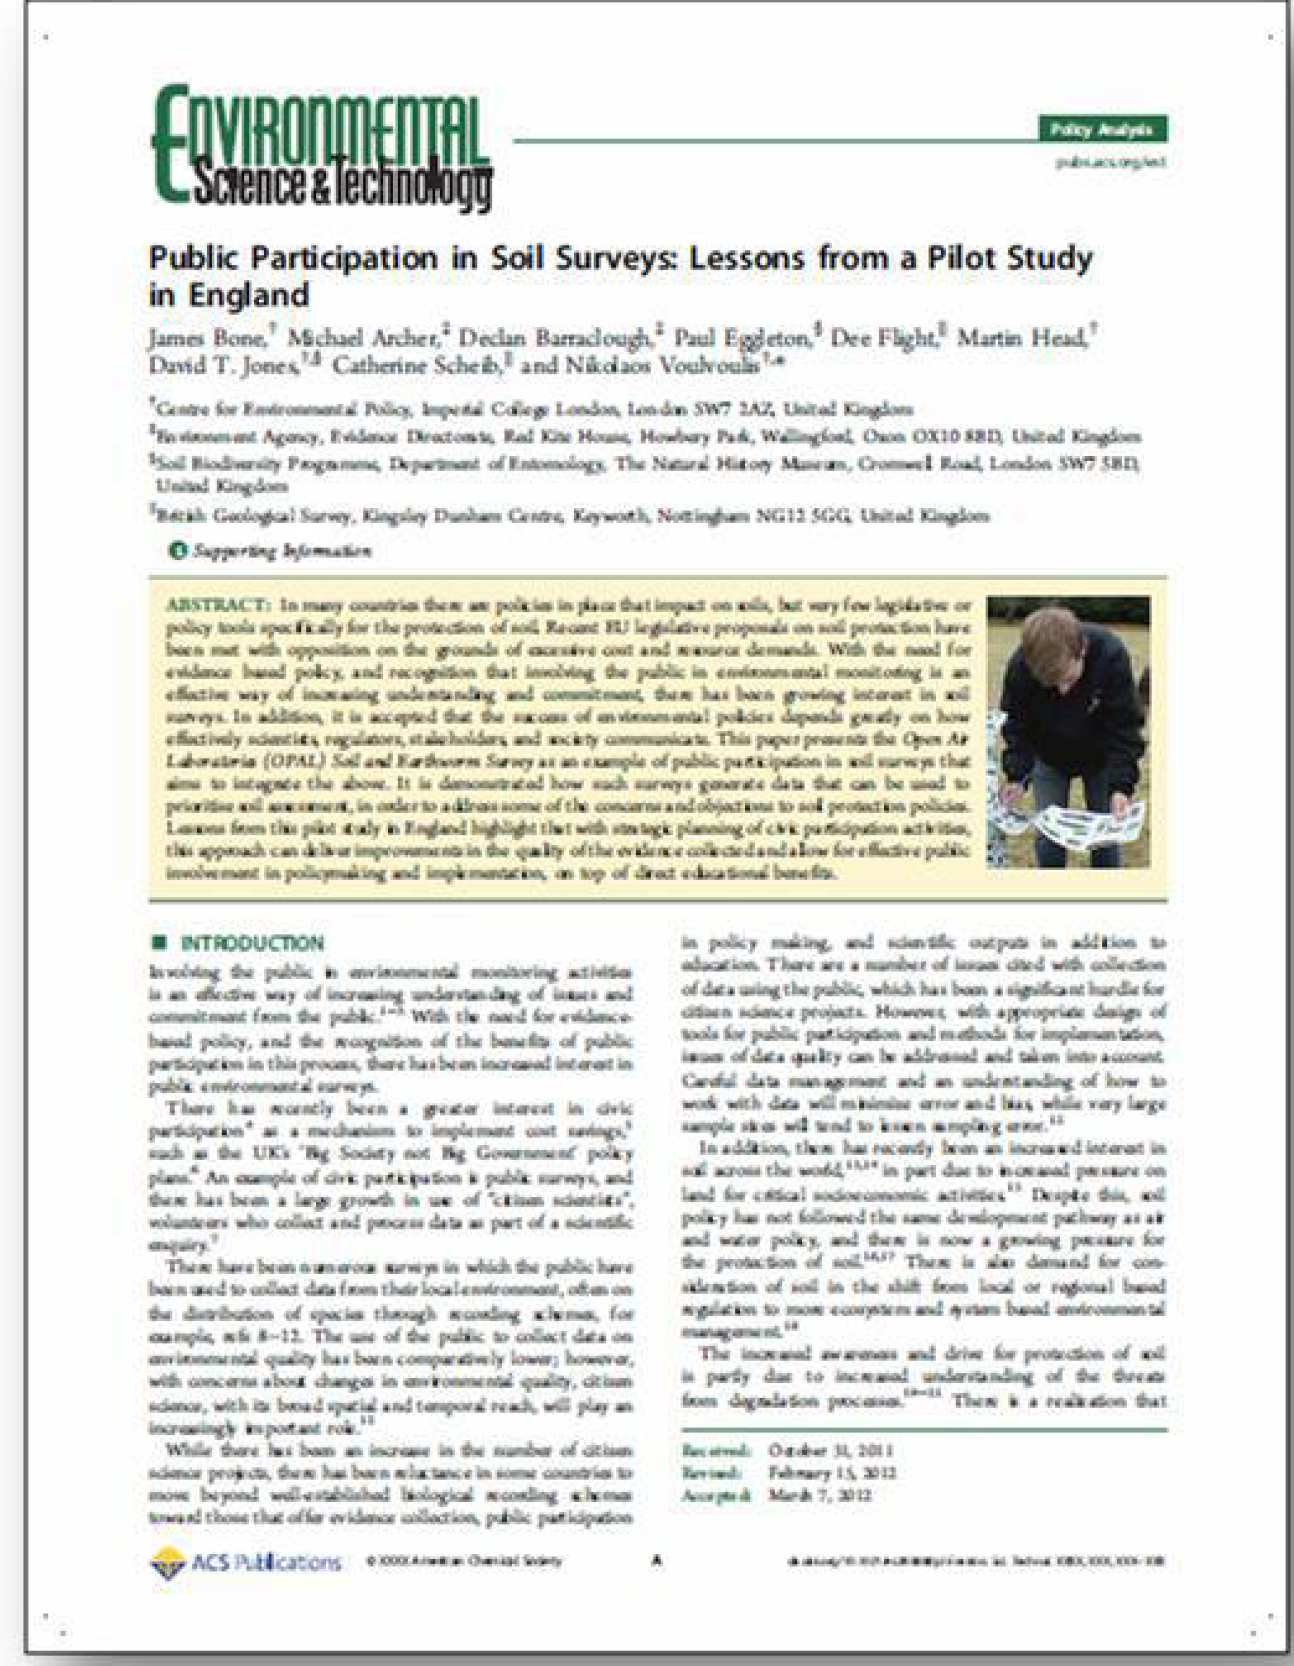 Public participation in soil surveys: lessons from a pilot study in England.